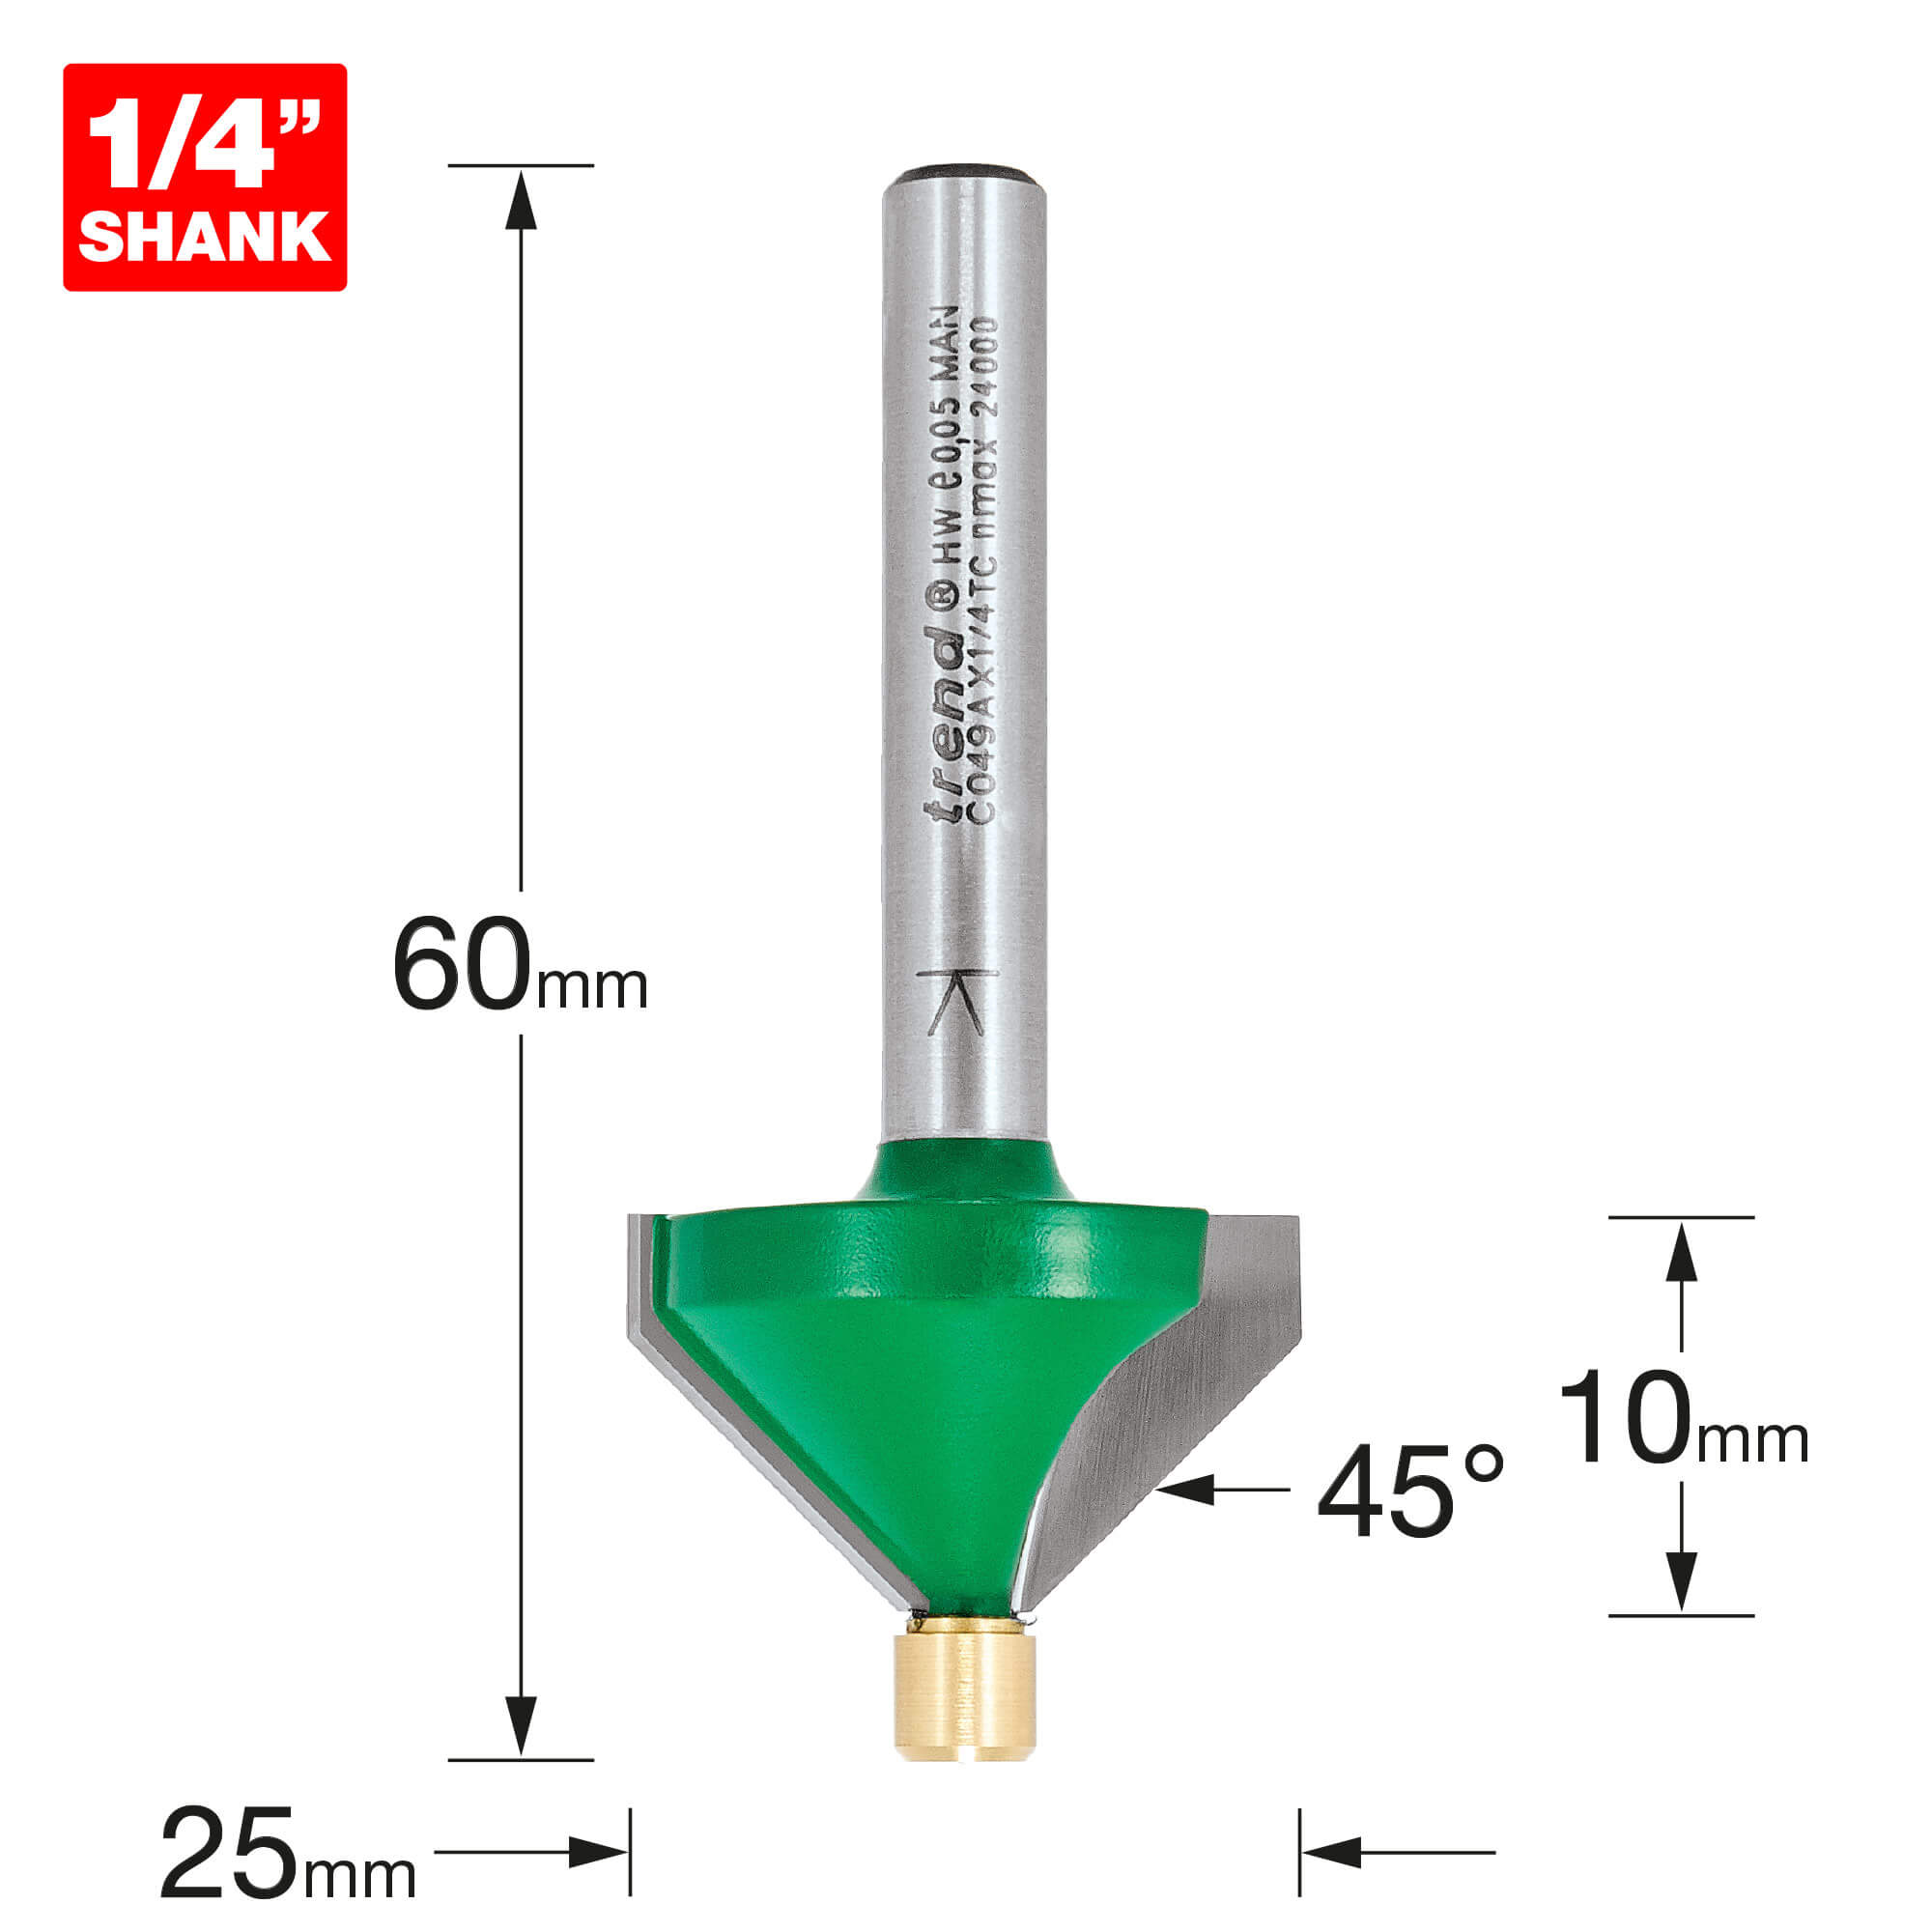 Image of Trend CRAFTPRO Pin Guided Chamfer Bevel Router Cutter 45 Degrees 10mm 1/4"